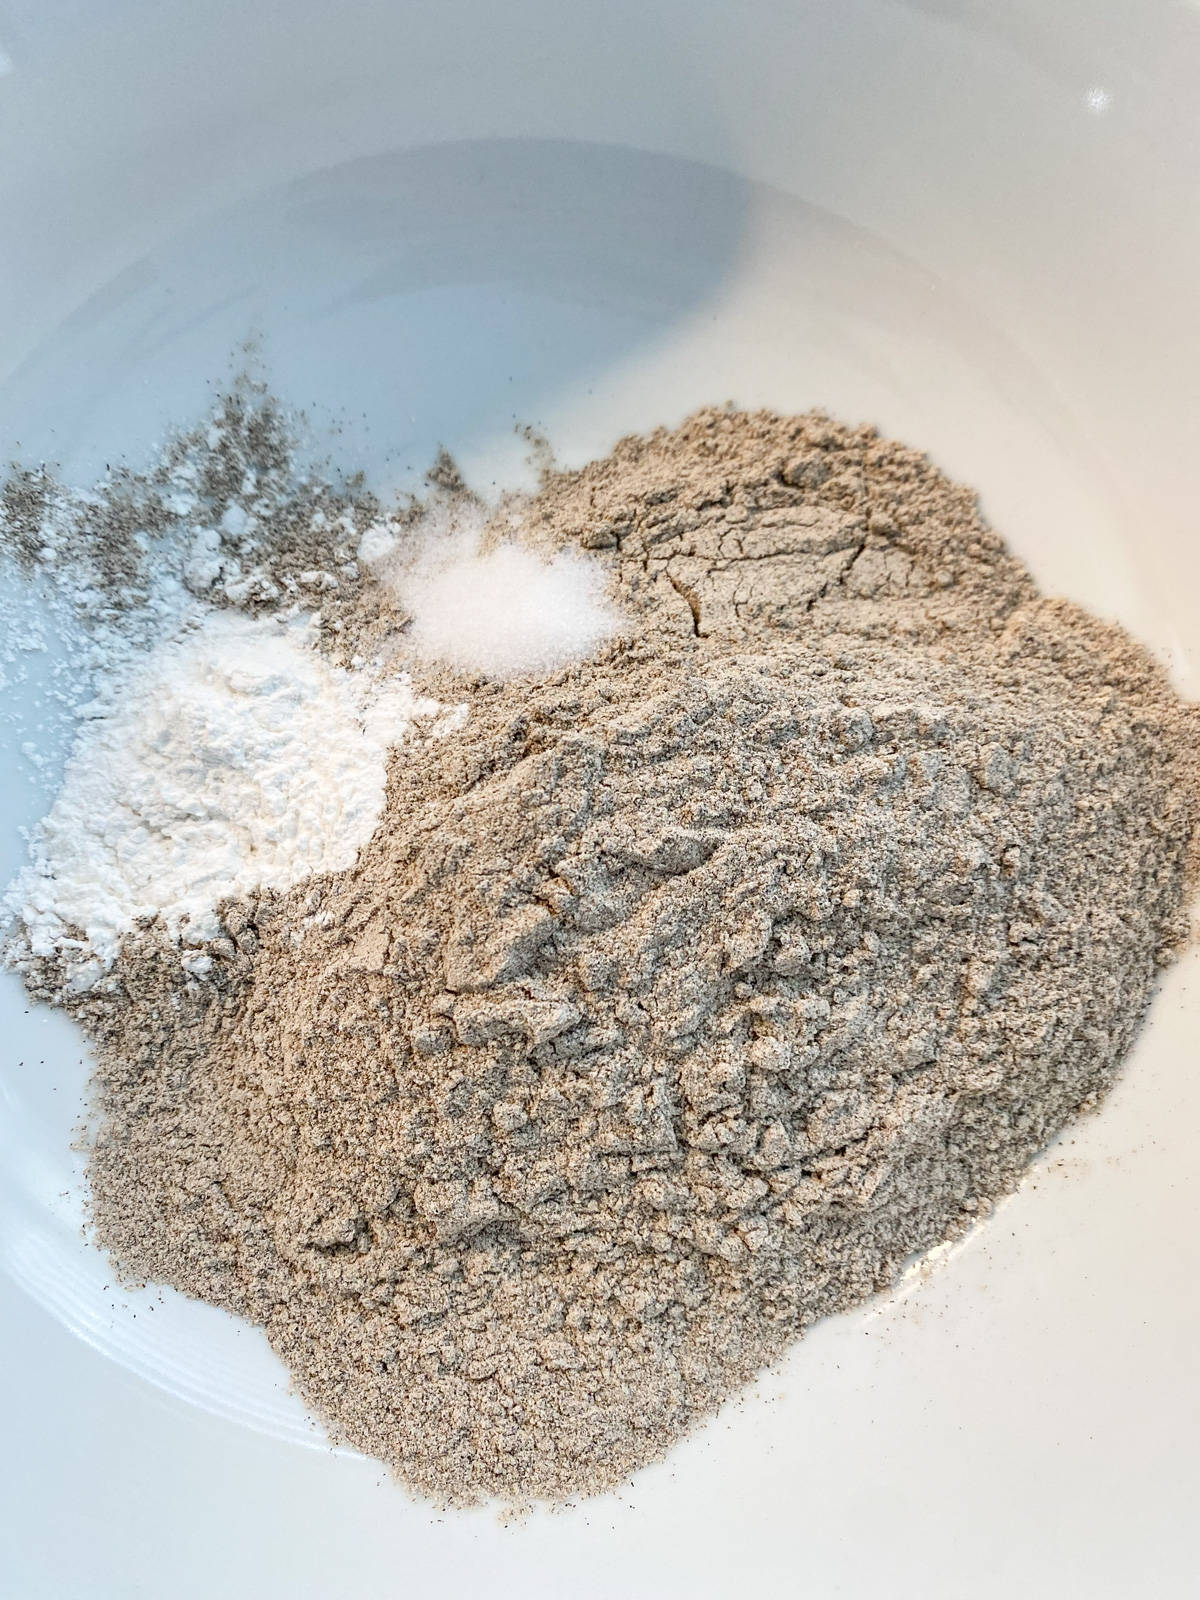 Dry biscuit ingredients in a bowl.